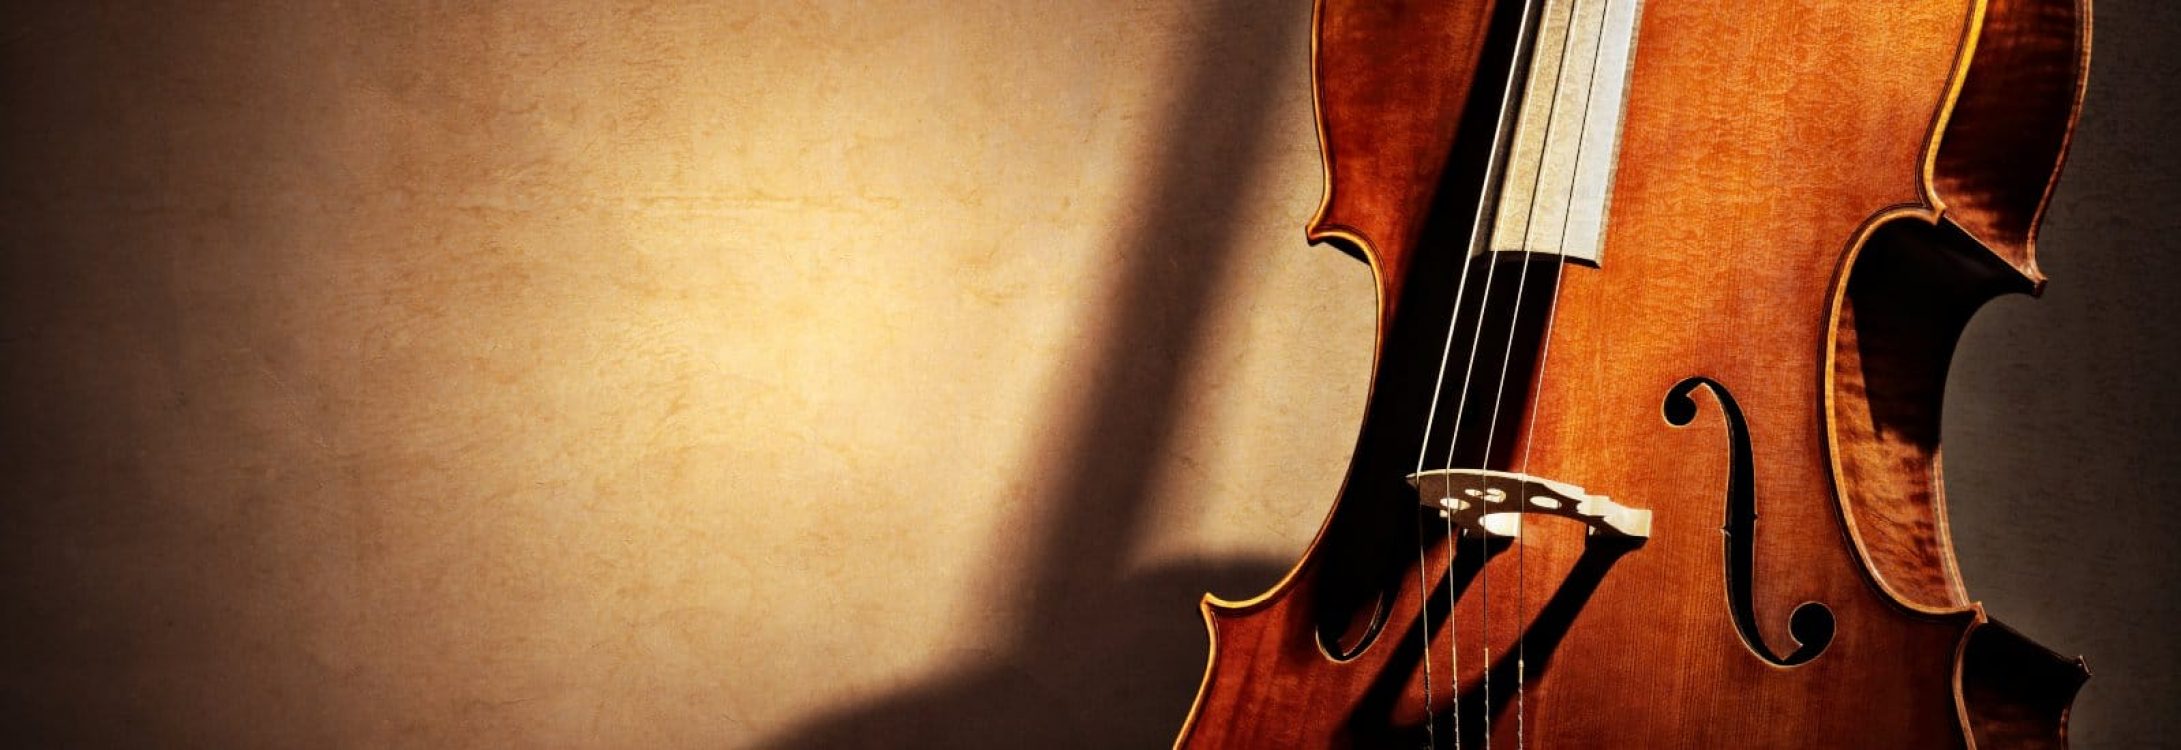 Cello background with silhouette and copy space for music concept